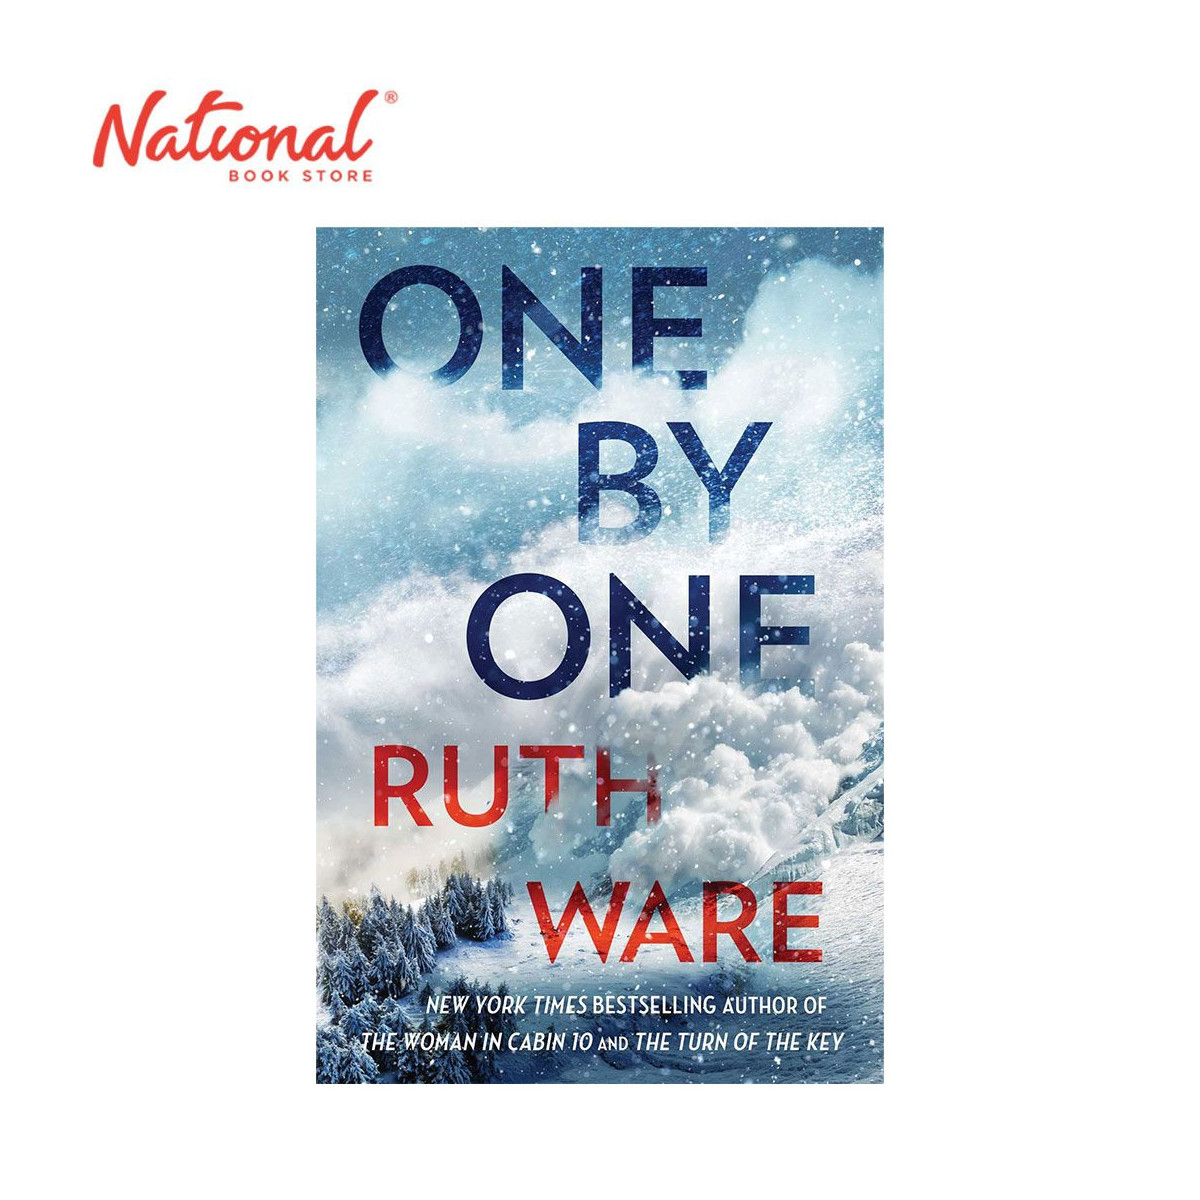 One By One by Ruth Ware - Hardcover - Thriller, Mystery & Suspense